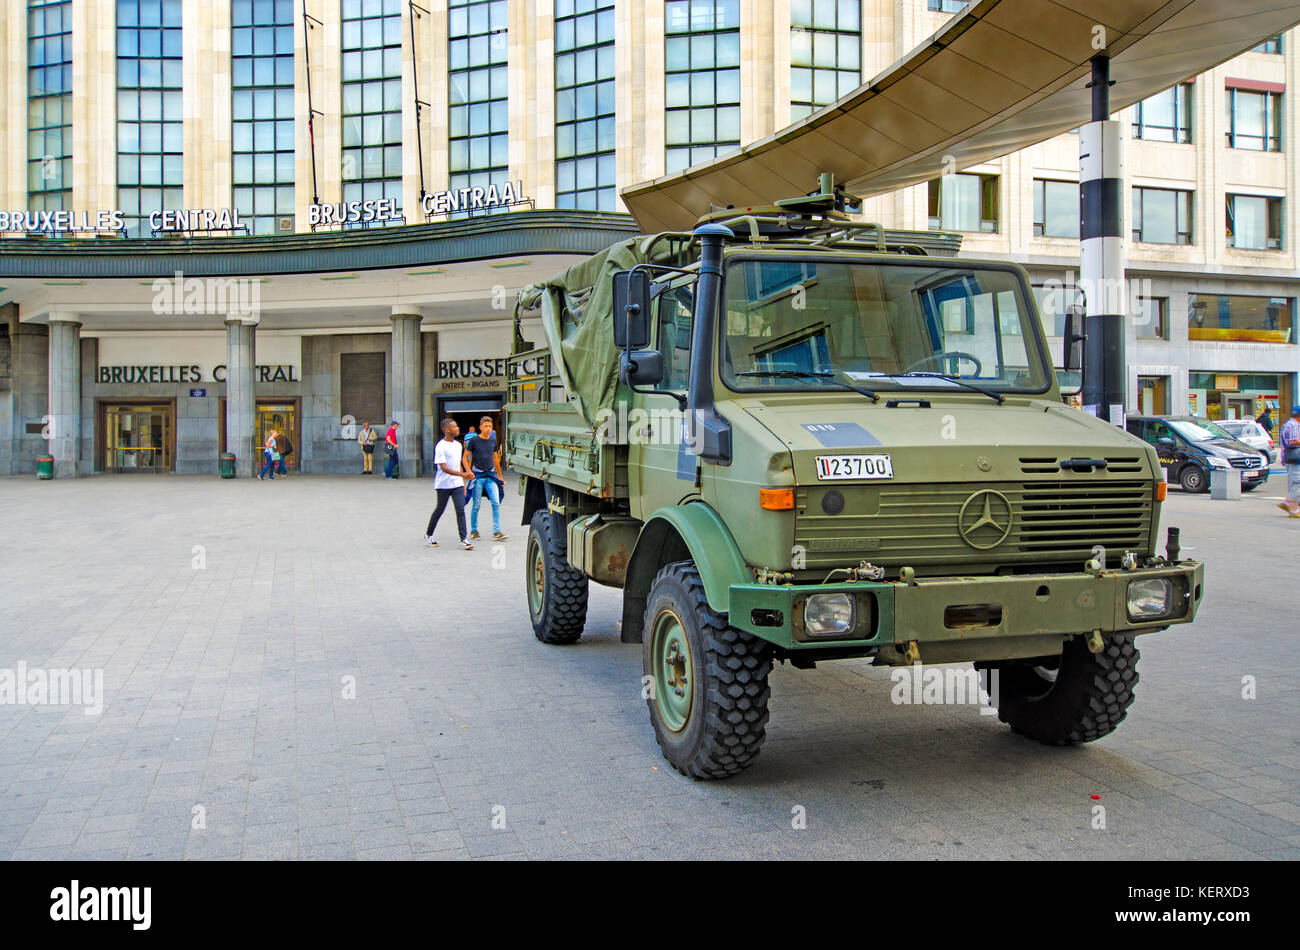 Brussels, Belgium. Army truck parked outside Brussels Central train station: Mercedes Benz Unimog 4x4 Light Utility Truck Stock Photo